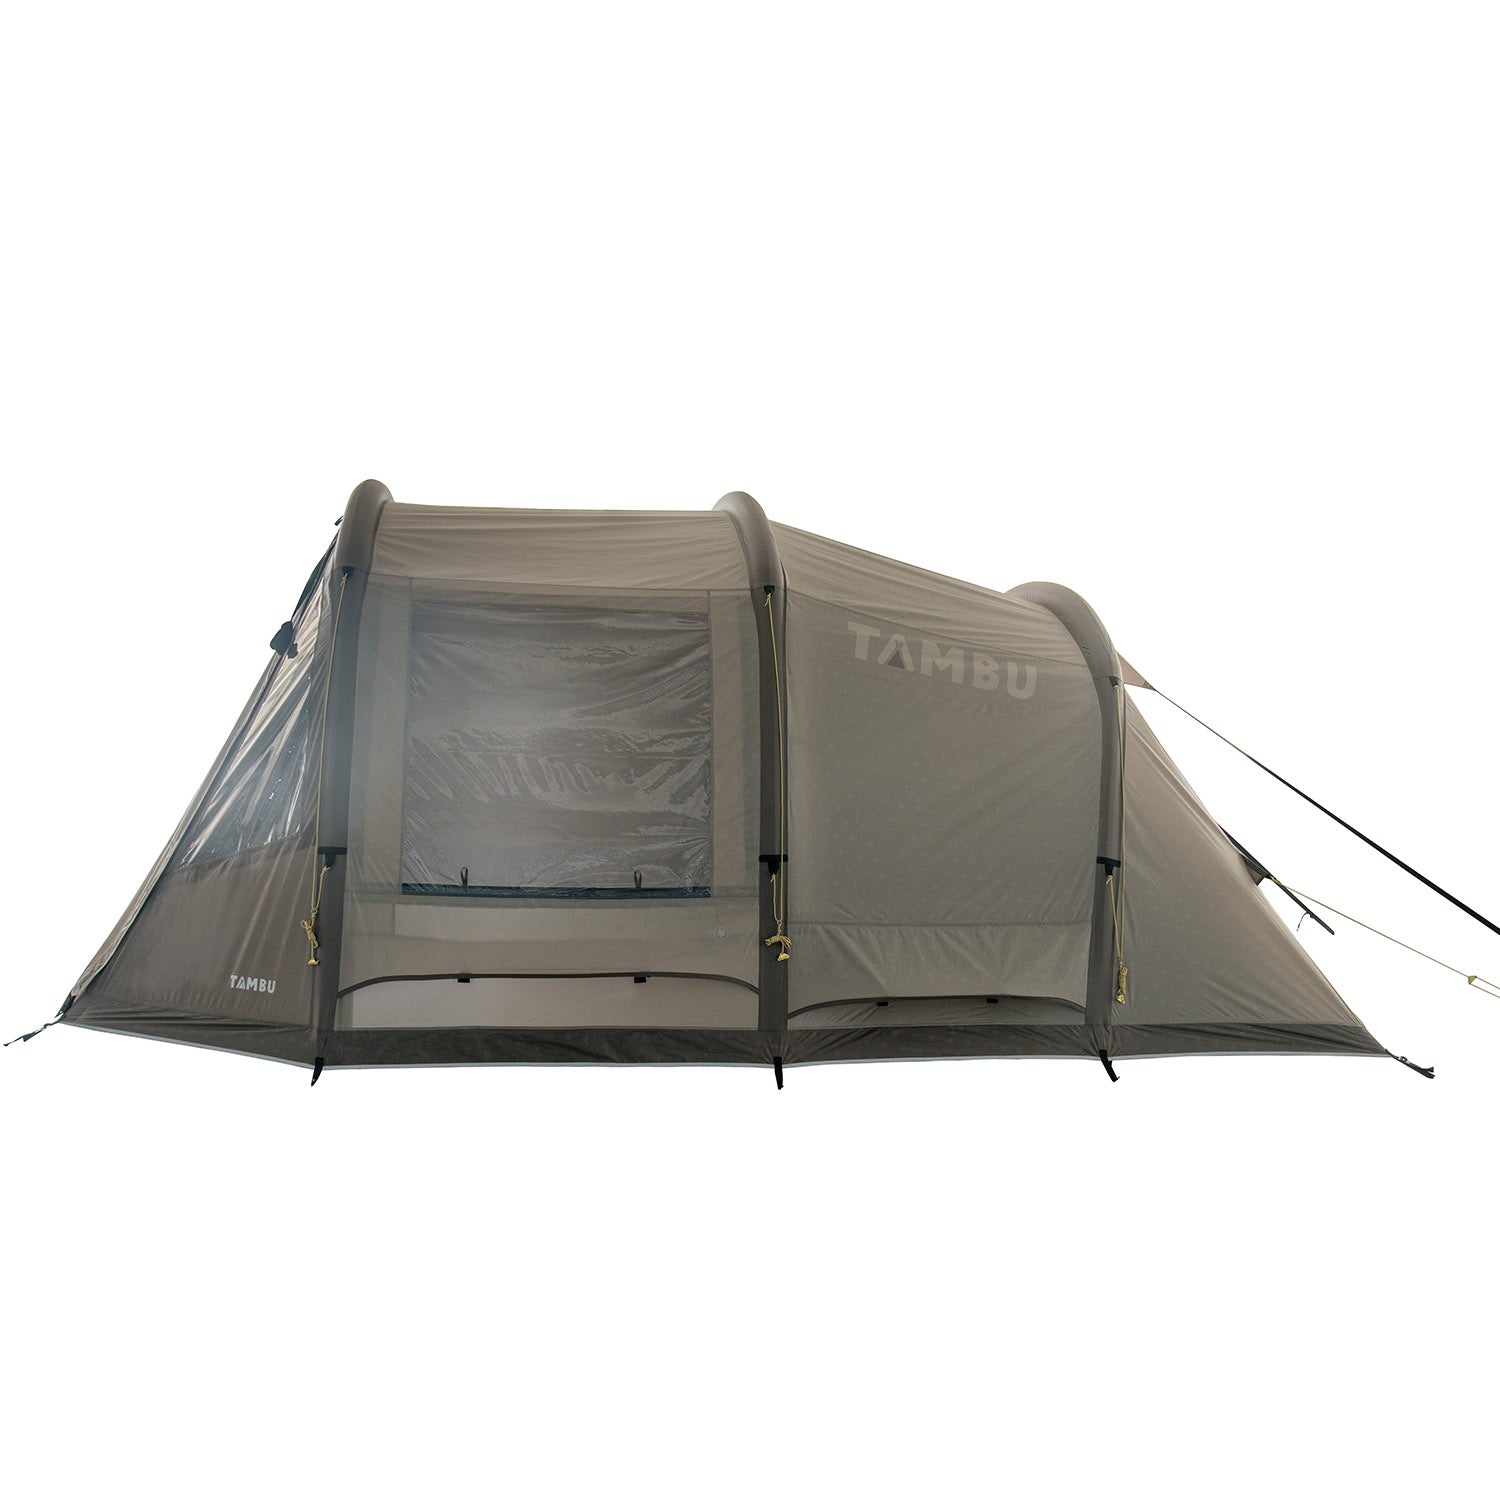 HUSIR | 4 person family tunnel tent Air